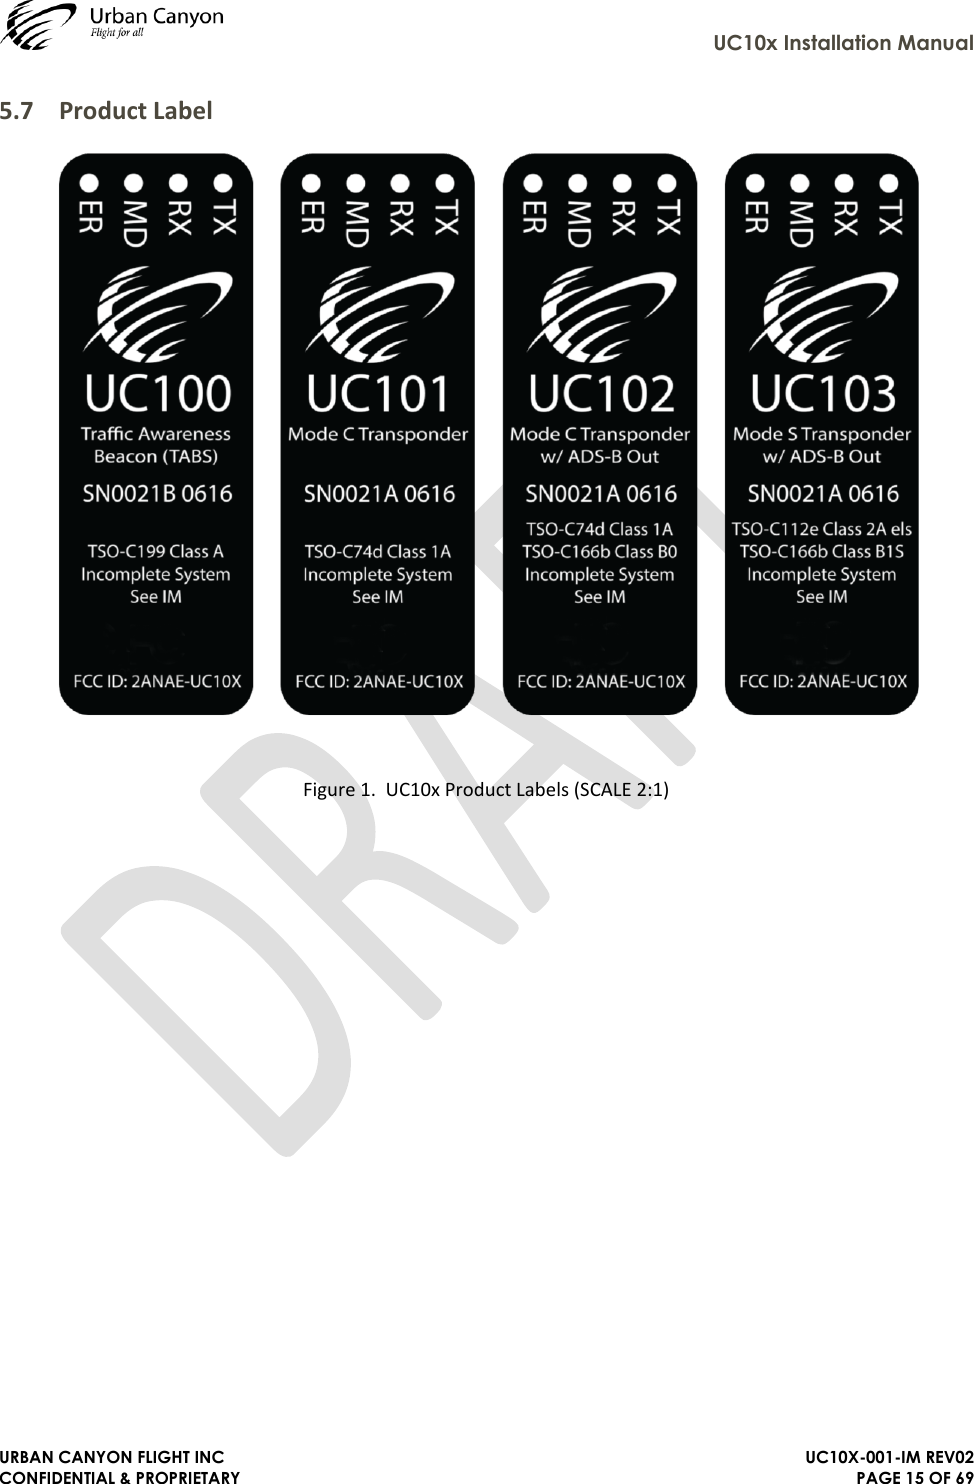     UC10x Installation Manual  URBAN CANYON FLIGHT INC   UC10X-001-IM REV02 CONFIDENTIAL &amp; PROPRIETARY PAGE 15 OF 69 5.7 Product Label   Figure 1.  UC10x Product Labels (SCALE 2:1)  